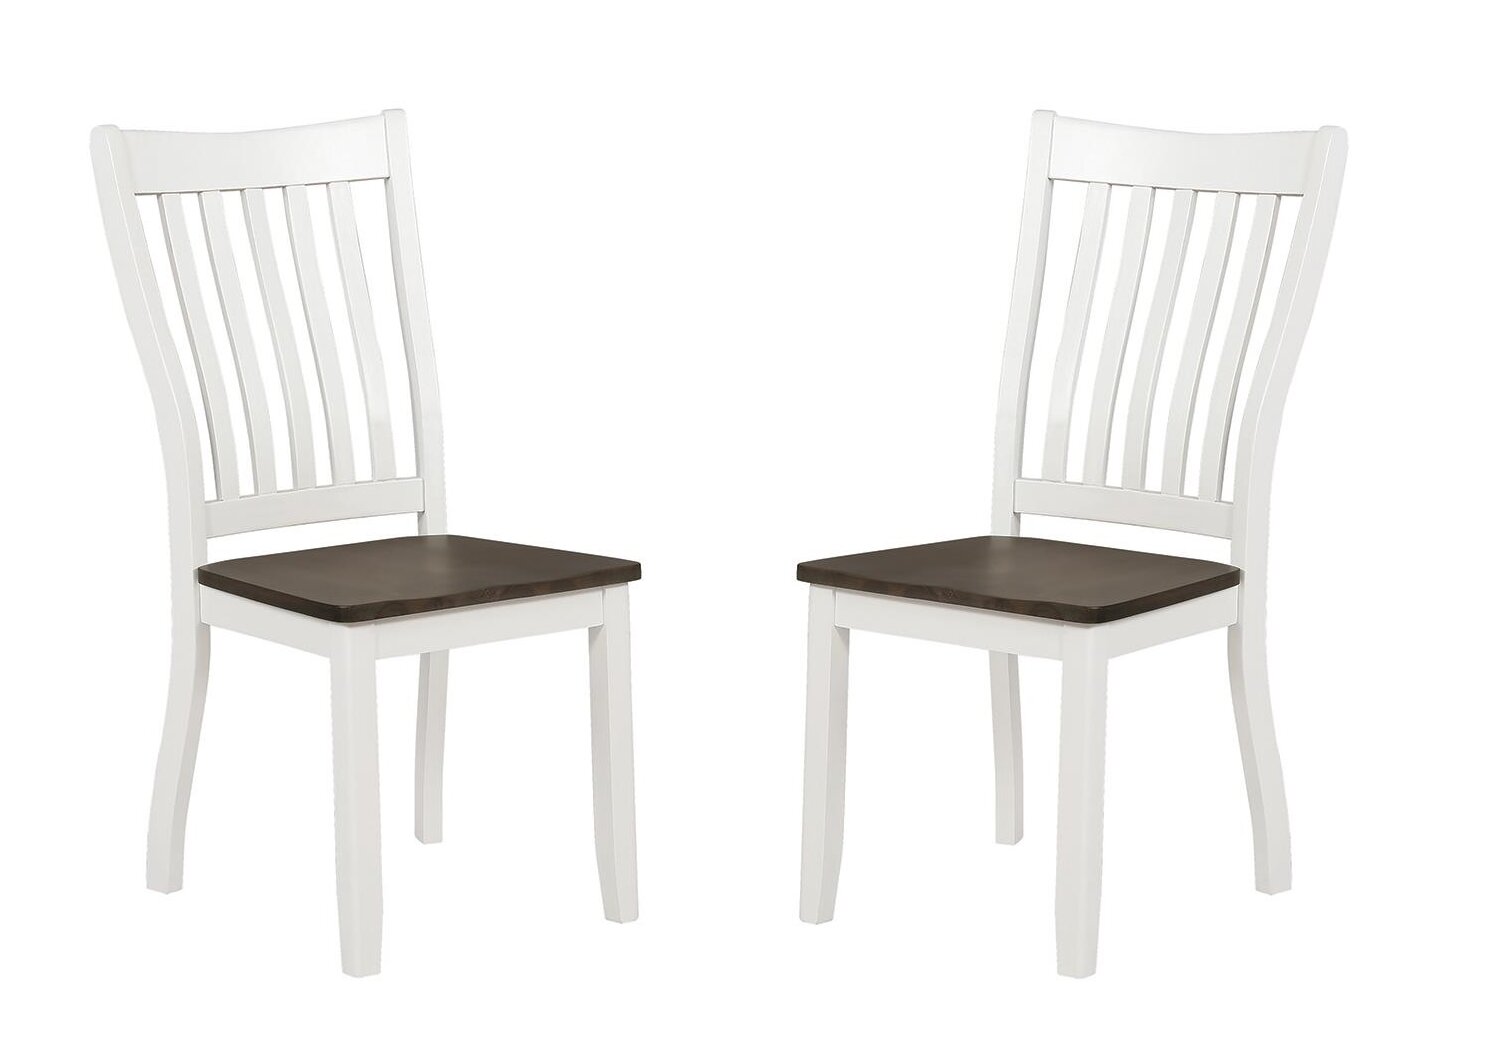 Wood Chair Seats  - Shop Wayfair For The Best Wood Chair With Cushion Seat.